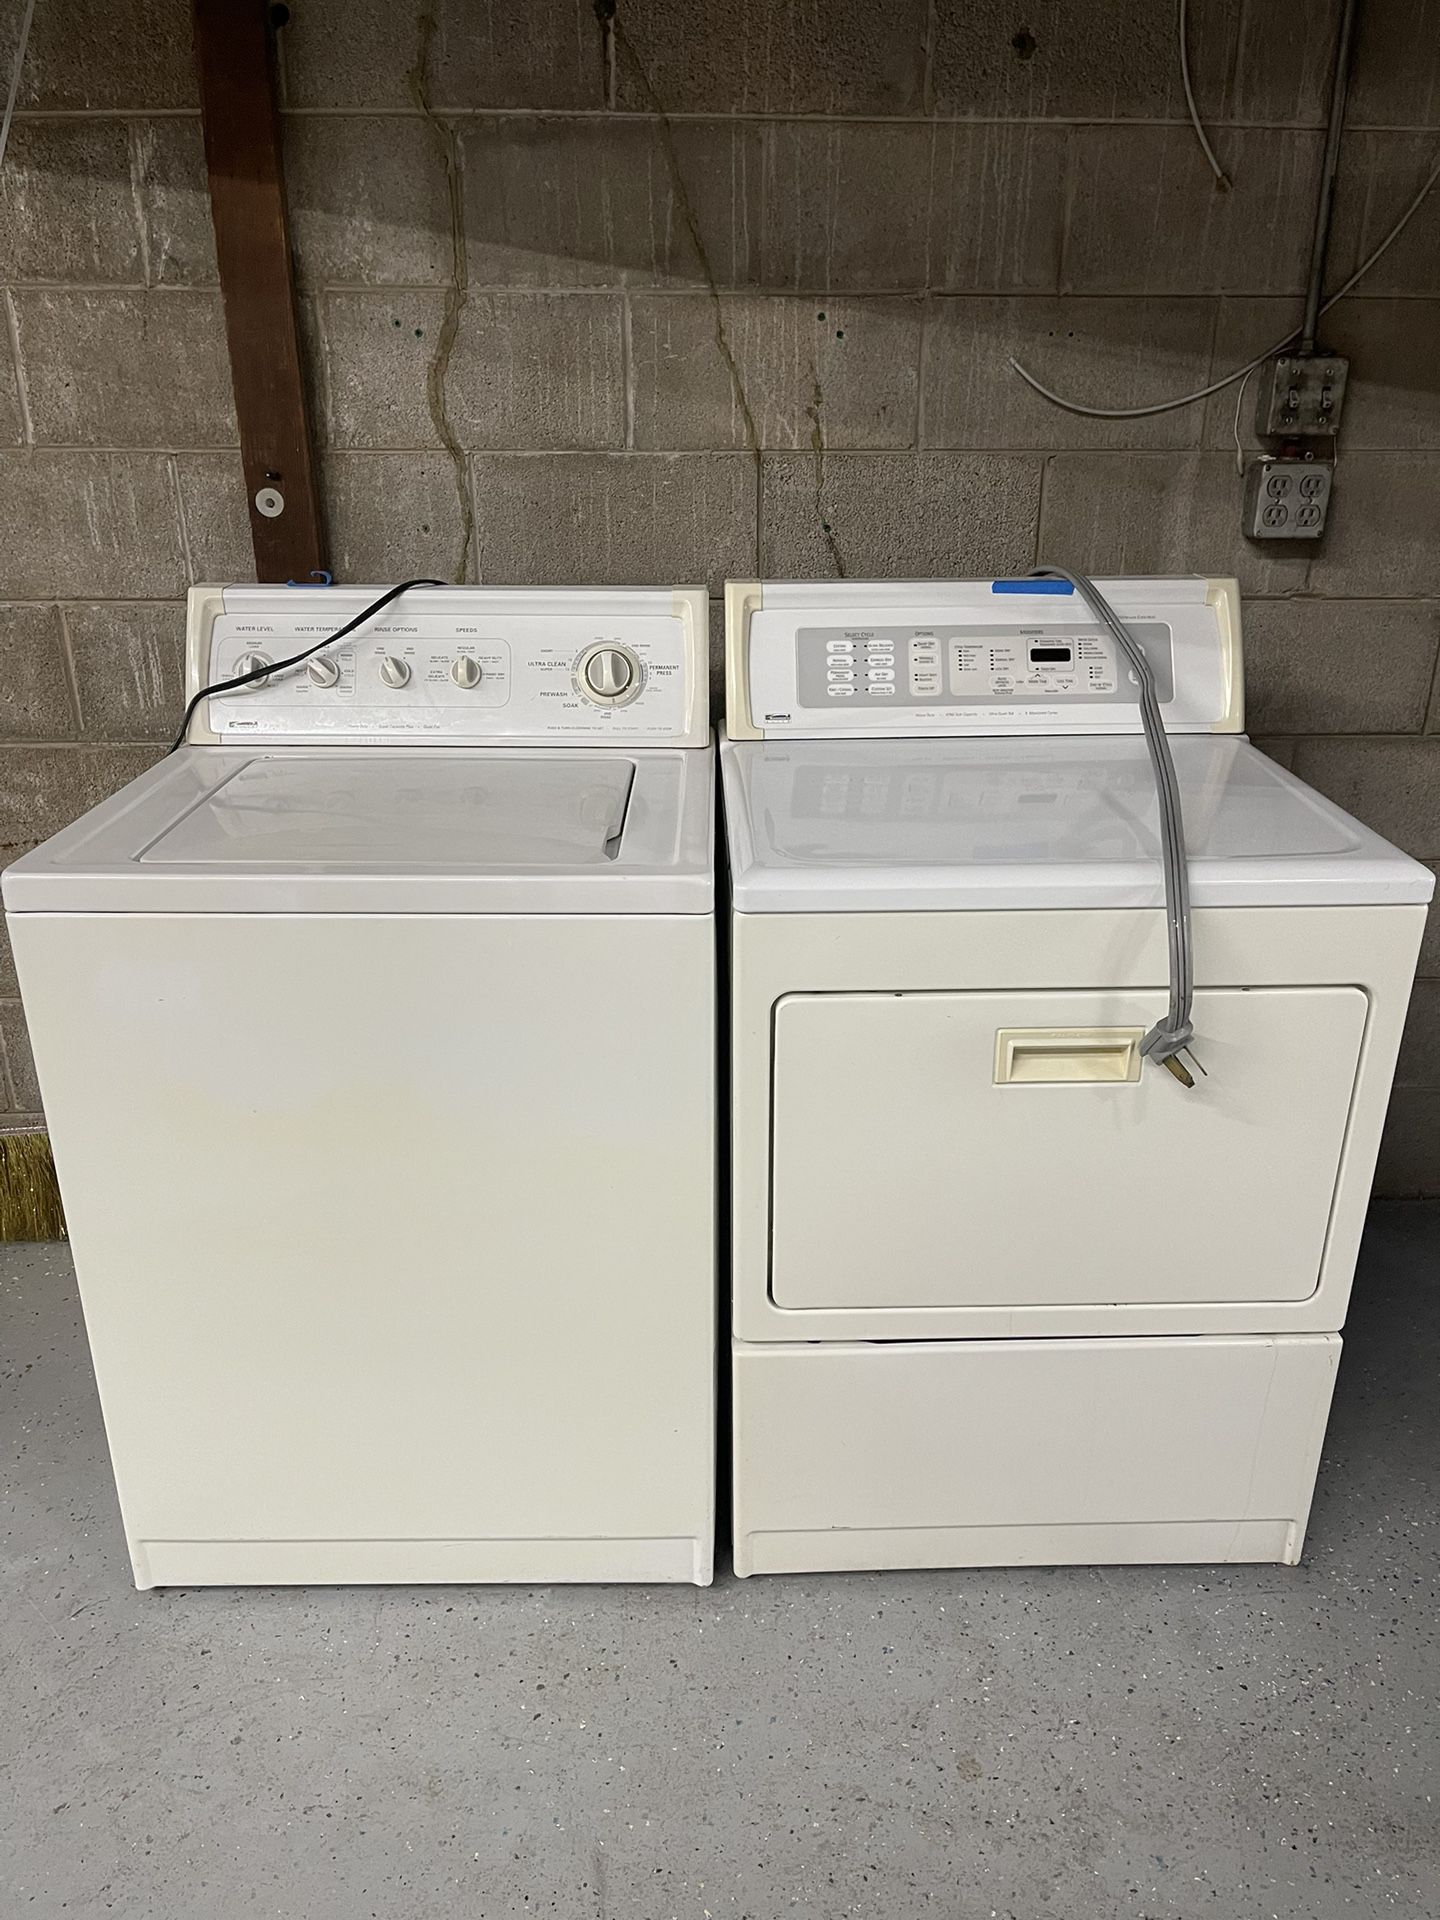 kenmore electric dryer and washer 